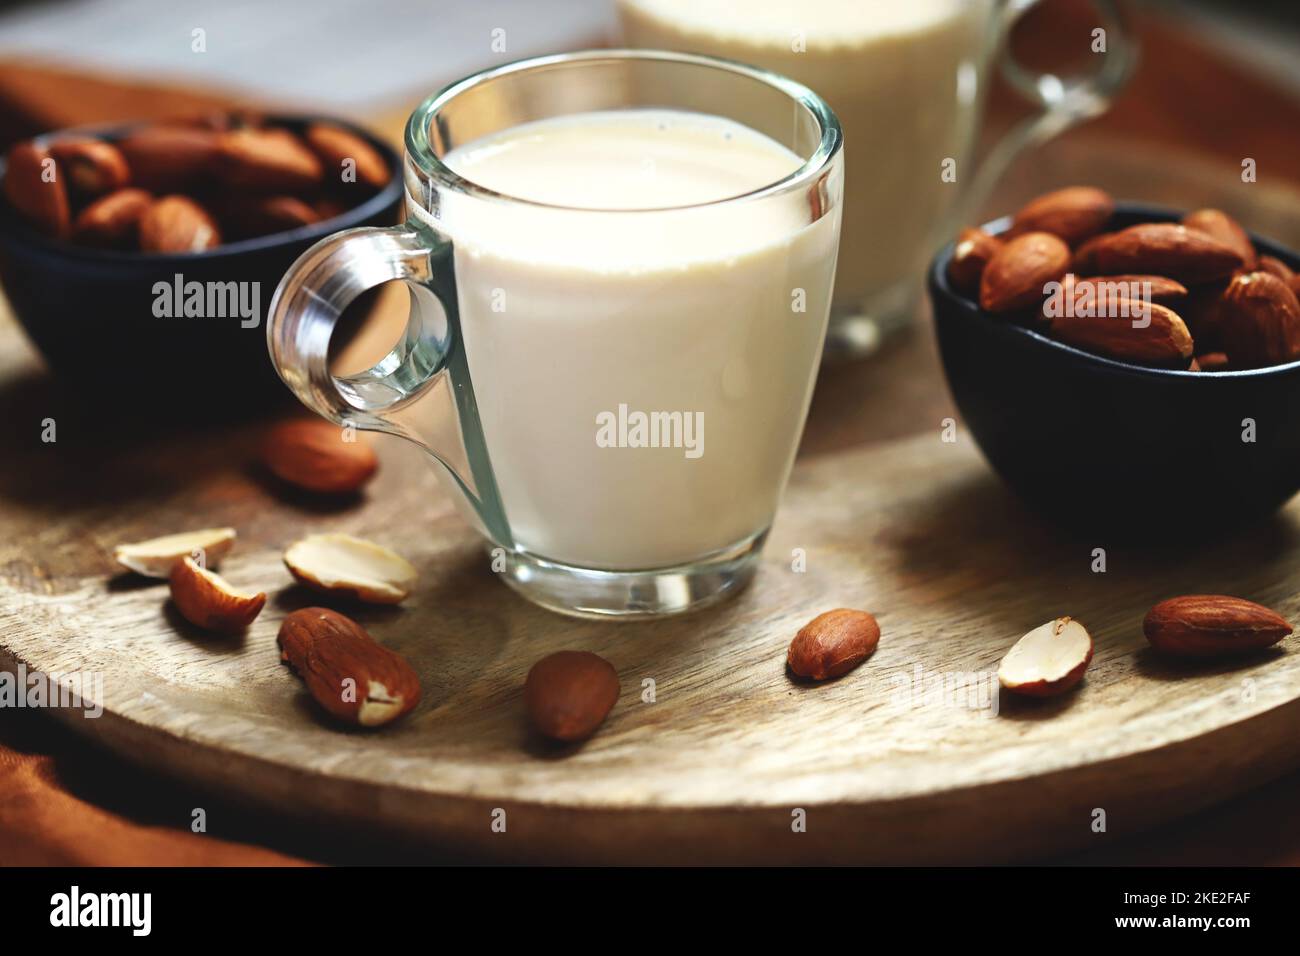 Almonds and almond milk in a glass. Stock Photo